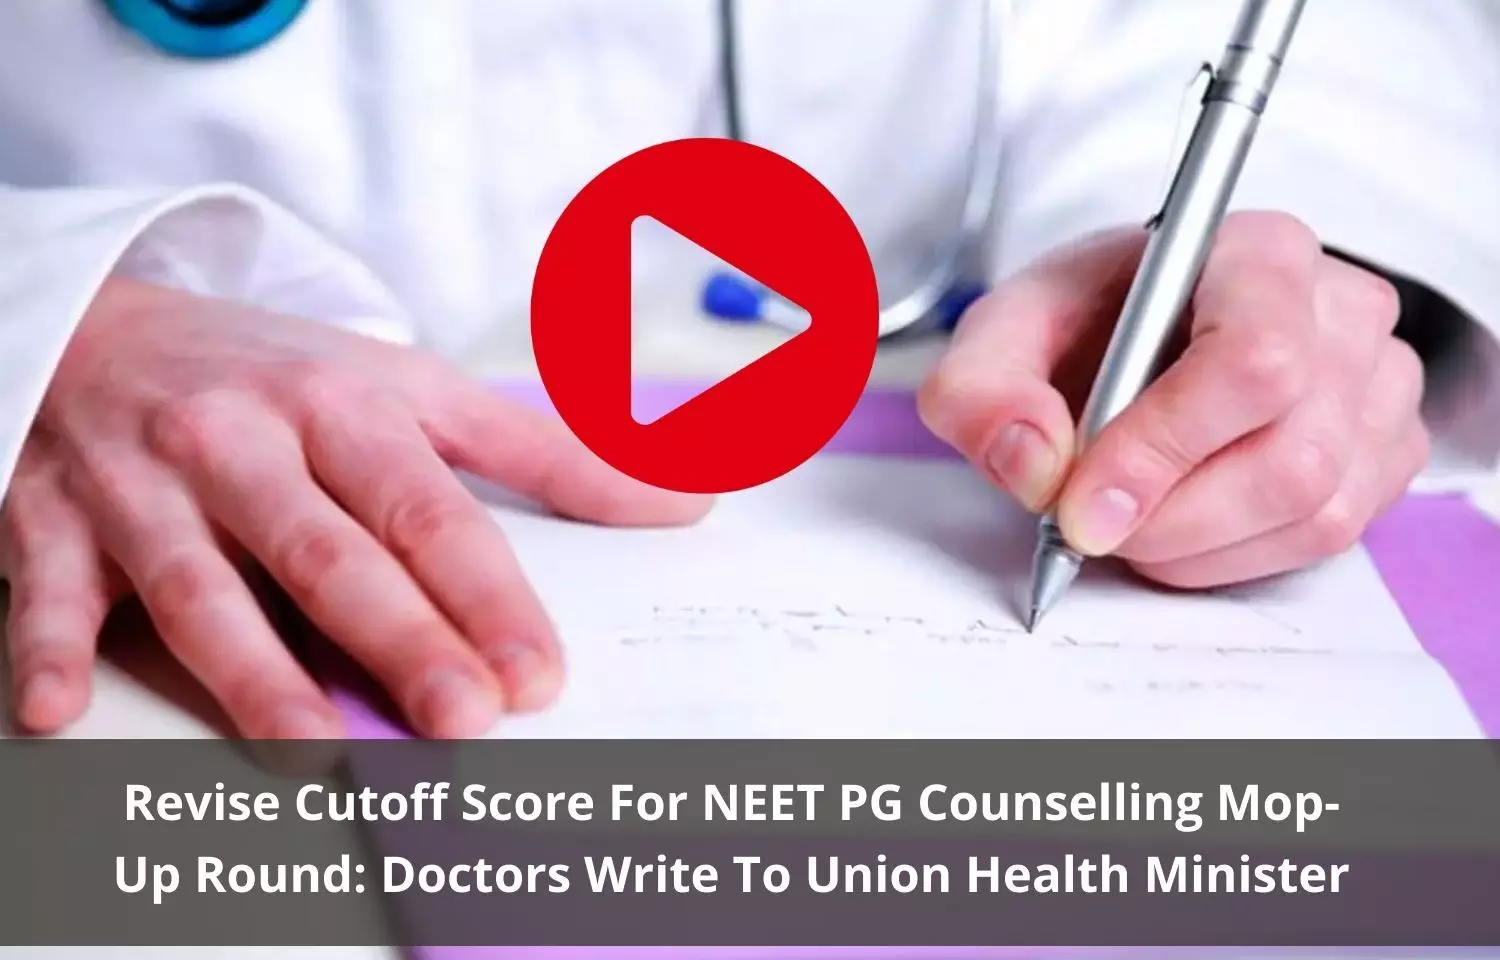 Due to declining vacant seats, doctors appeal revision in NEET PG score